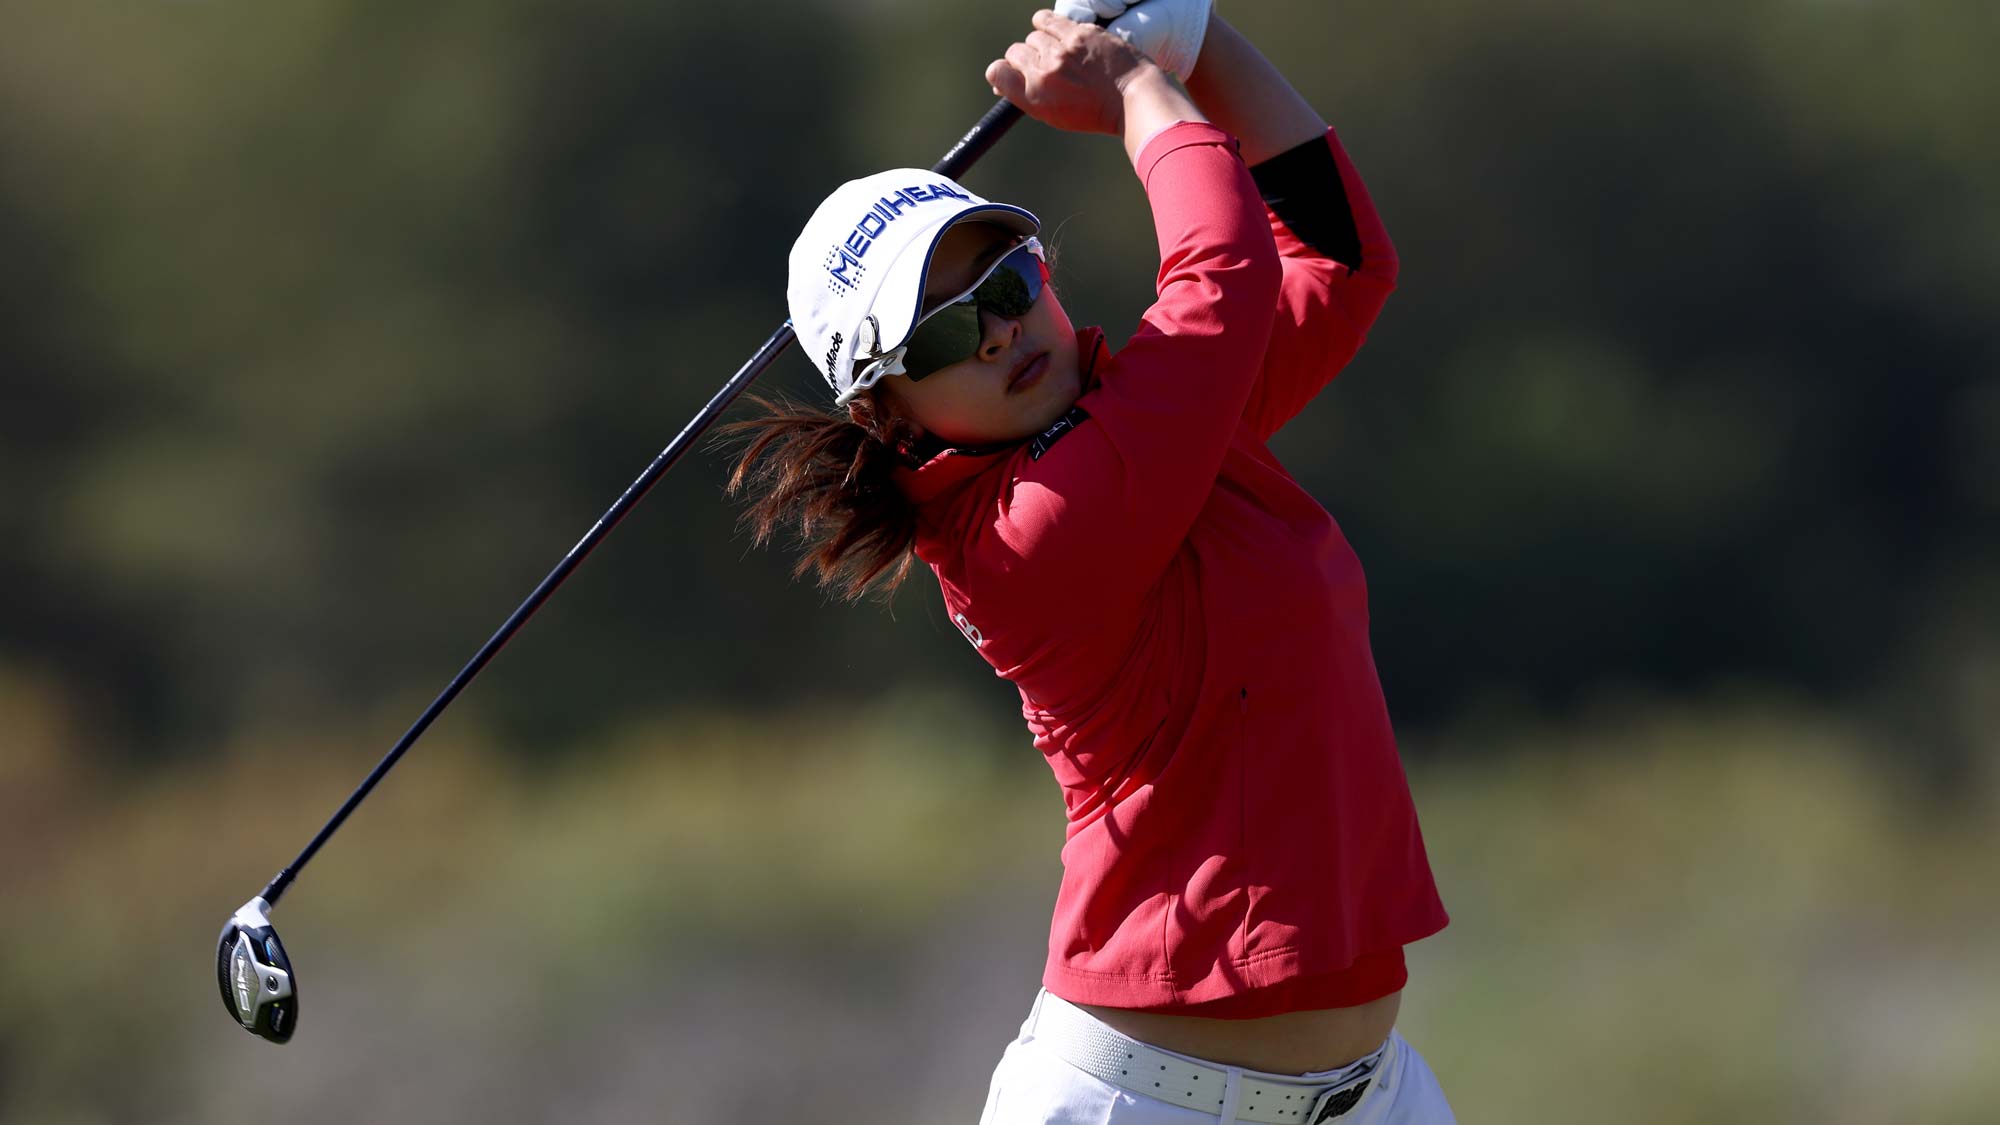 Sei Young Kim of Korea hits a tee shot on the eighth hole during the first round of The Ascendant LPGA benefiting Volunteers of America at Old American Golf Club